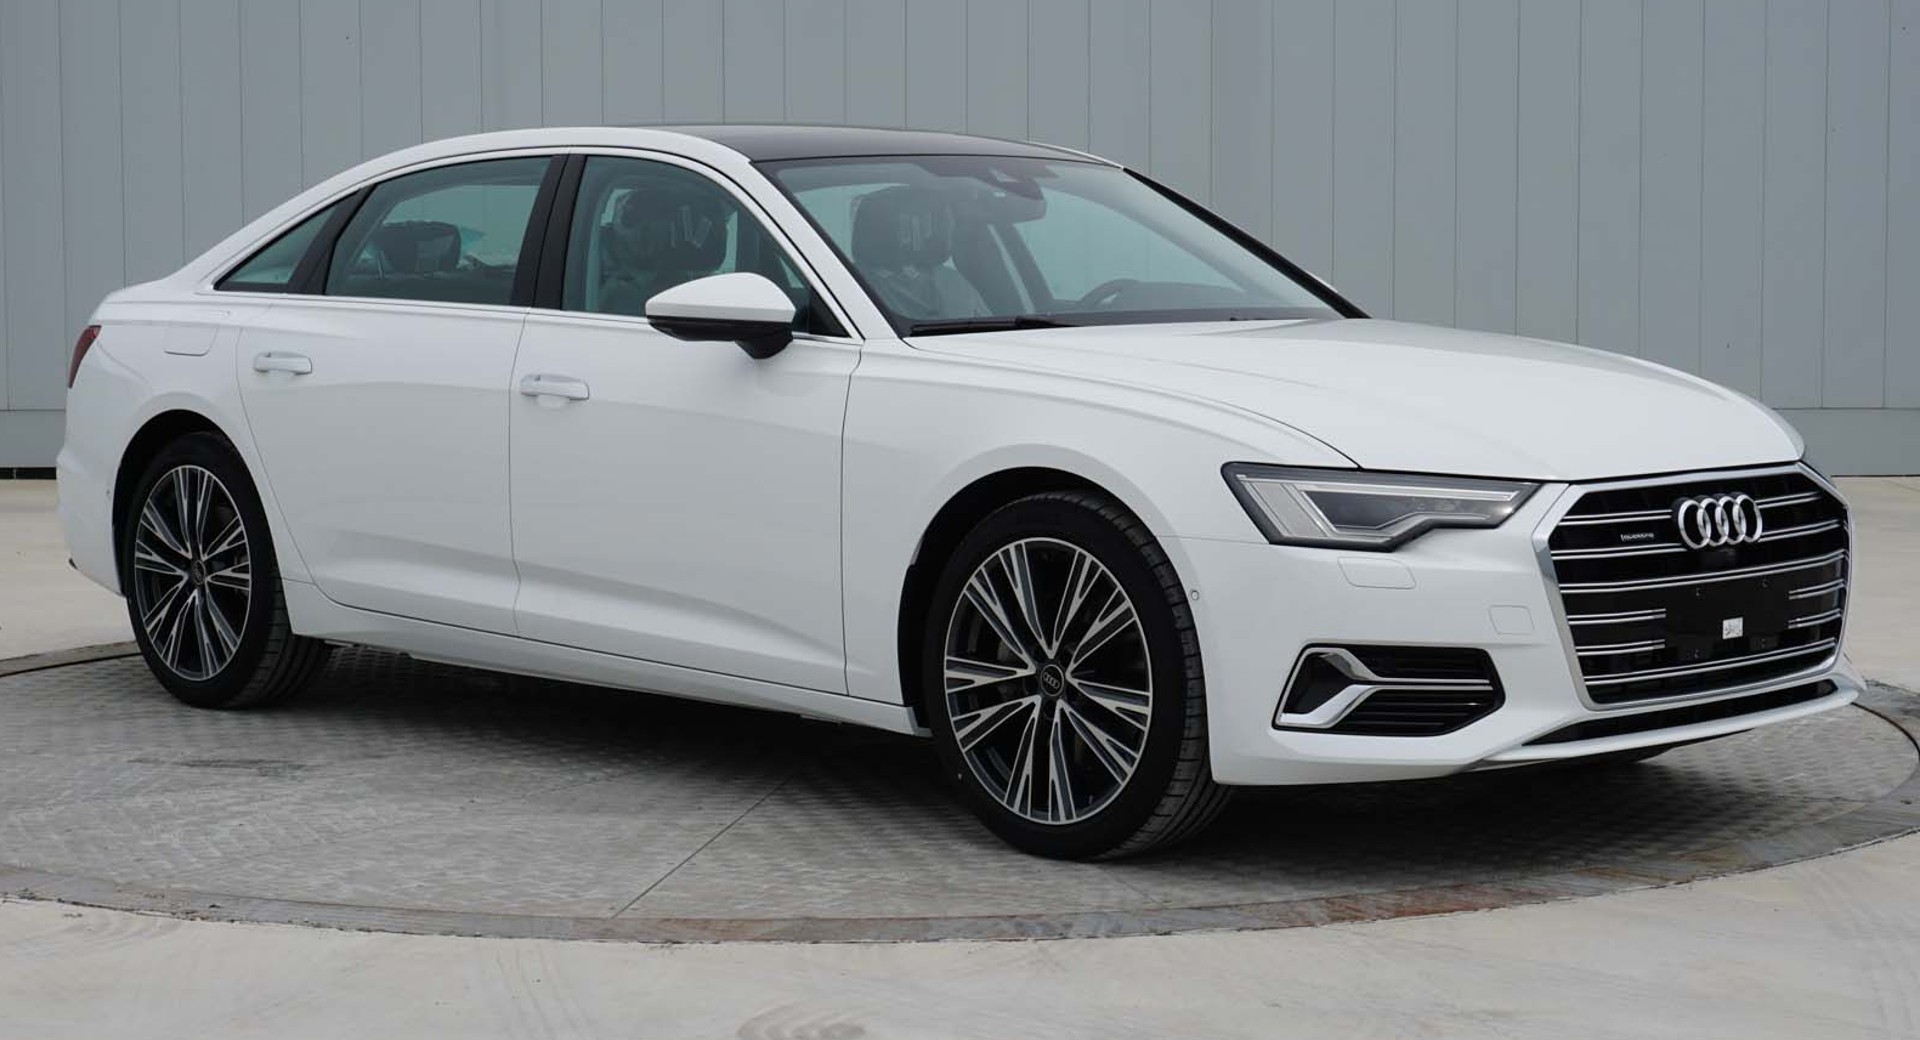 jurk plafond maximaal 2023 Audi A6 Facelift Possibly Previewed By China's Updated A6 L | Carscoops